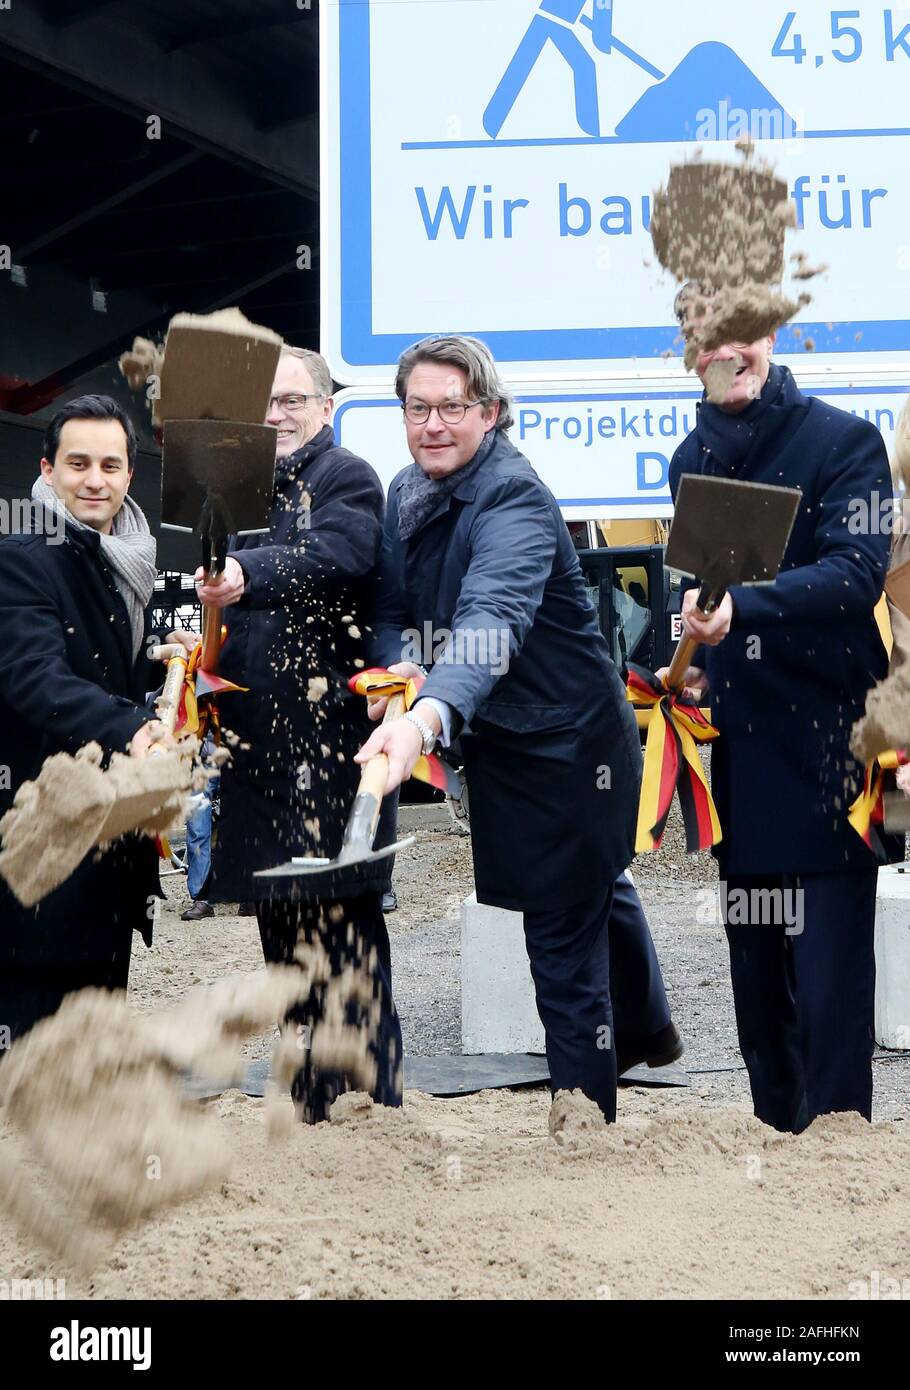 Duisburg, Germany. 16th Dec, 2019. Mahmut Özdemir (SPD), member of the Bundestag, Hendrick Schulte, NRW State Secretary, Andreas Scheuer (CSU), Federal Minister of Transport, and Hendrik Wüst (CDU), NRW Minister of Transport, are taking part in the ground-breaking ceremony for the new A40 bridge over the Rhine. The new bridge is scheduled to go into operation in 2026. Credit: Roland Weihrauch/dpa/Alamy Live News Stock Photo